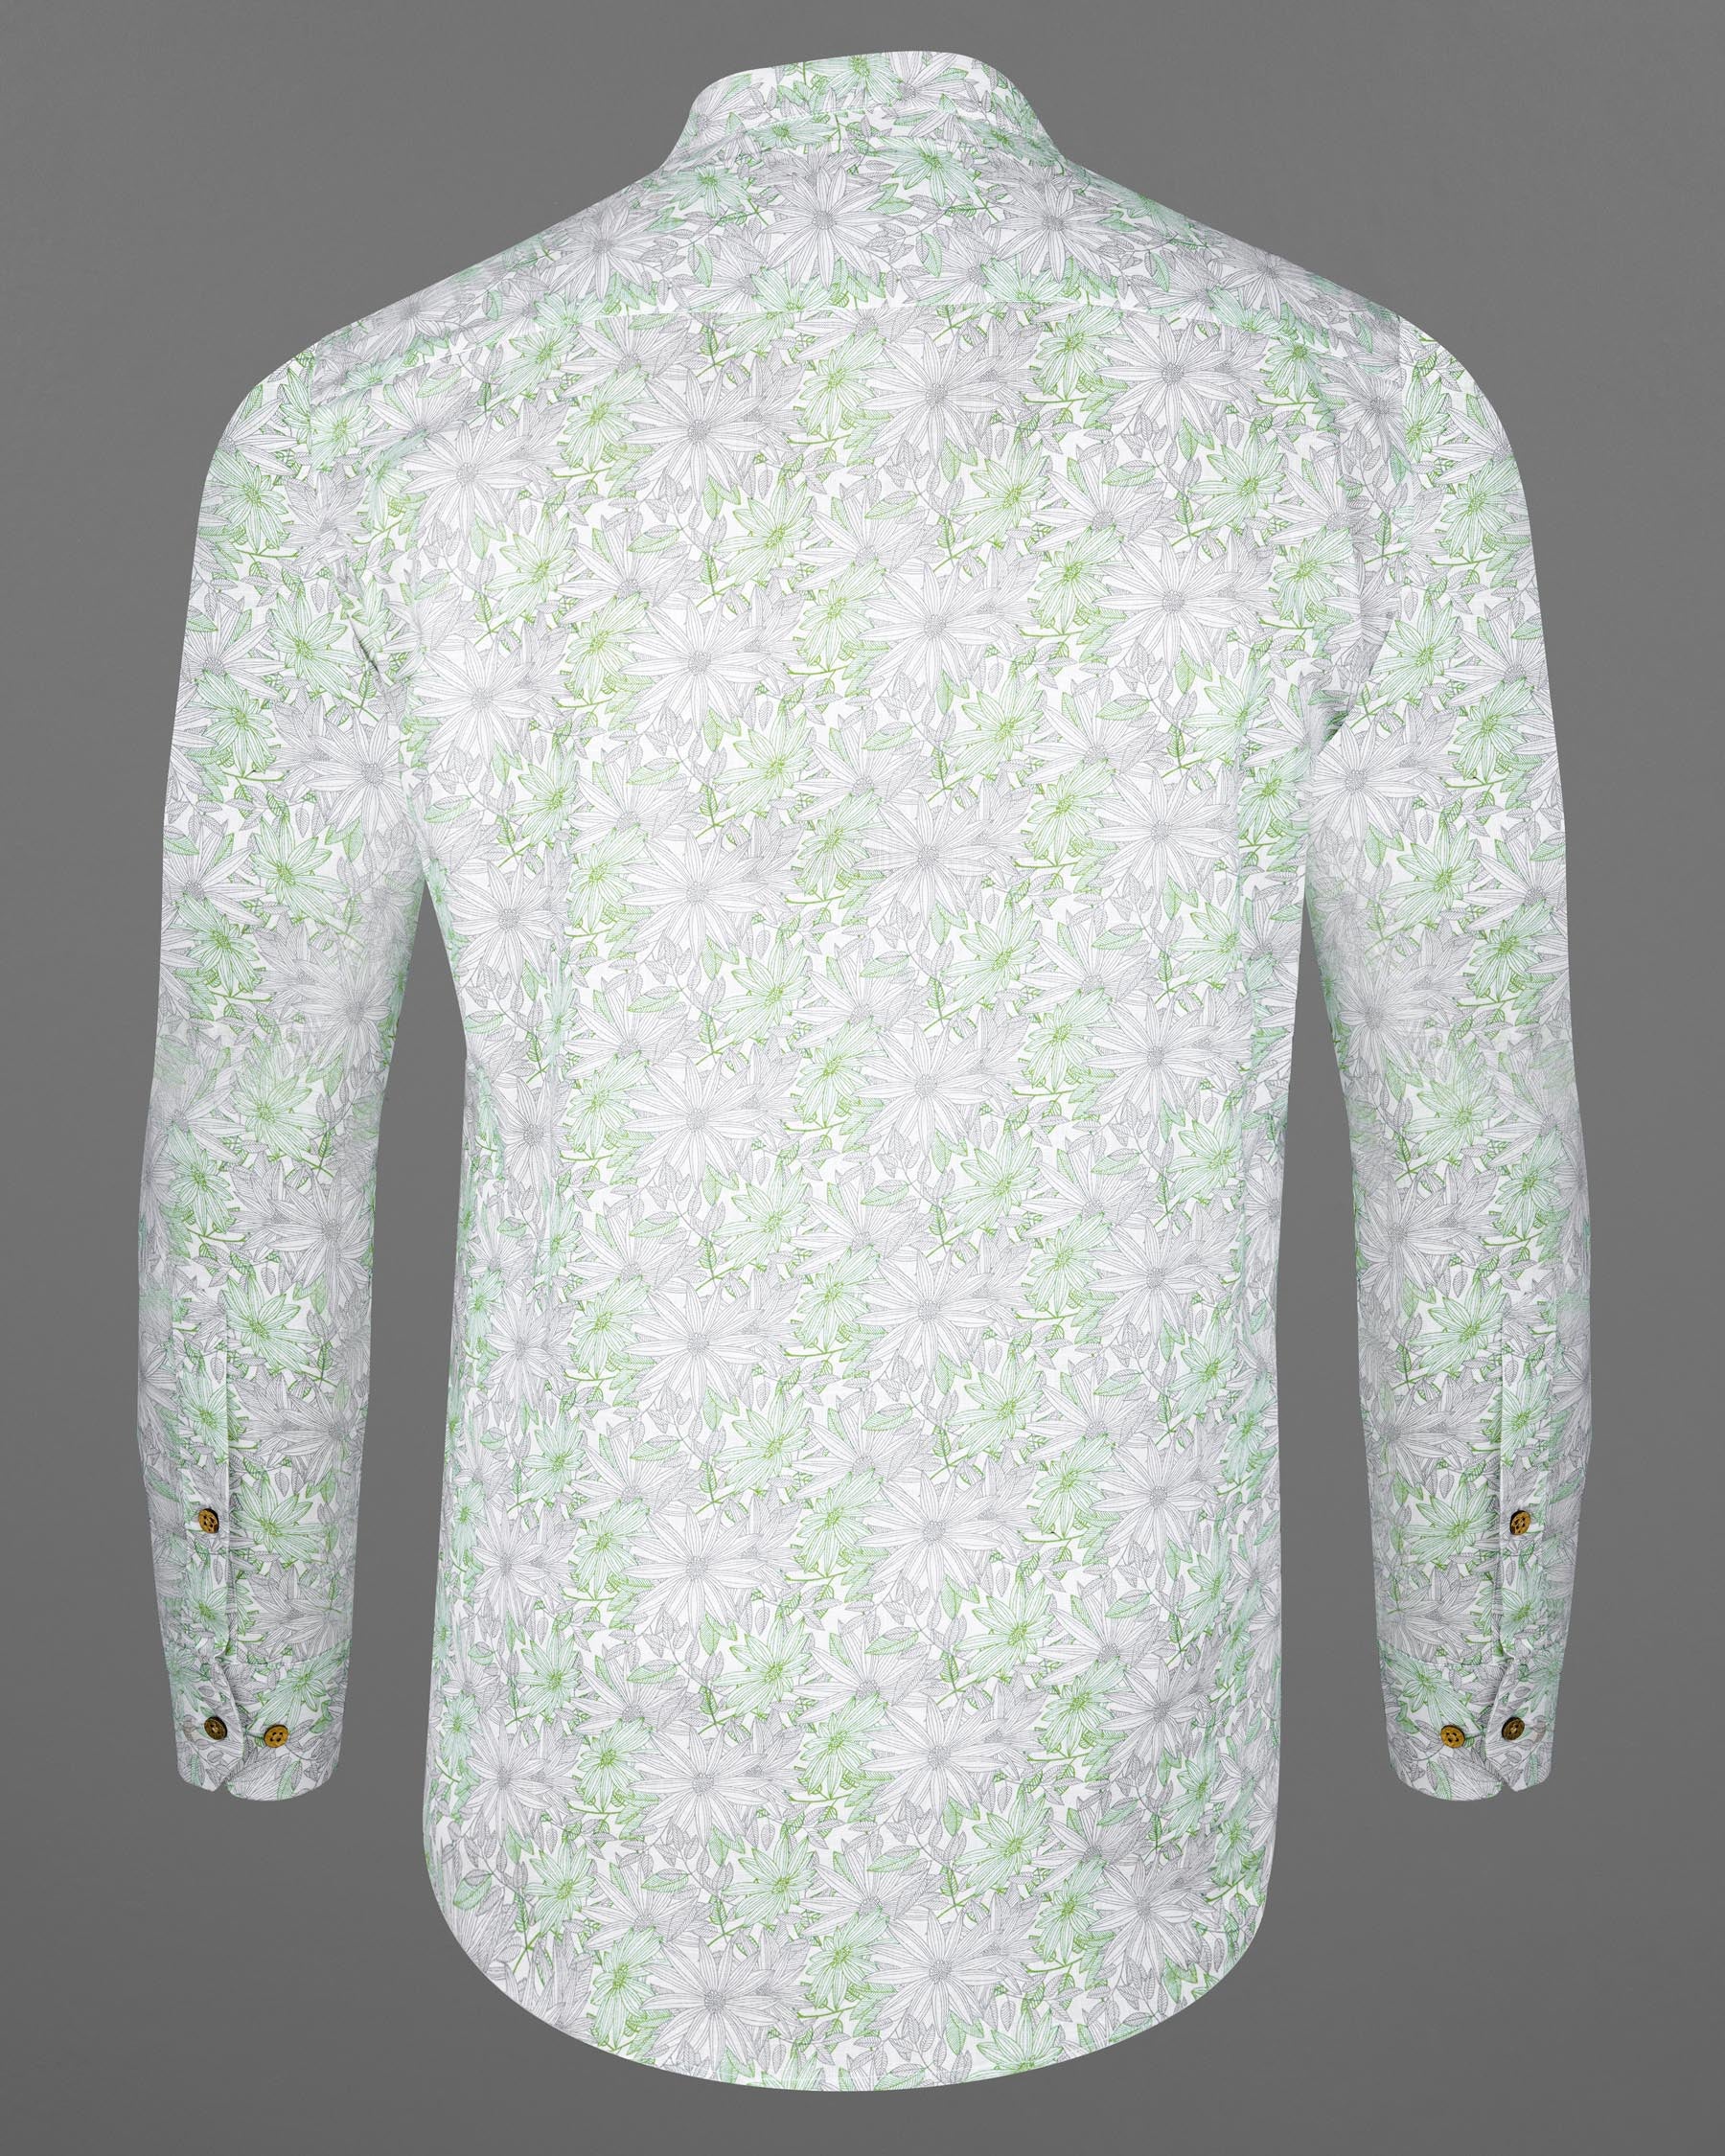 Olivine Green With White Floral Printed Luxurious Linen Kurta Shirt 7933-KS-38, 7933-KS-H-38, 7933-KS-39, 7933-KS-H-39, 7933-KS-40, 7933-KS-H-40, 7933-KS-42, 7933-KS-H-42, 7933-KS-44, 7933-KS-H-44, 7933-KS-46, 7933-KS-H-46, 7933-KS-48, 7933-KS-H-48, 7933-KS-50, 7933-KS-H-50, 7933-KS-52, 7933-KS-H-52